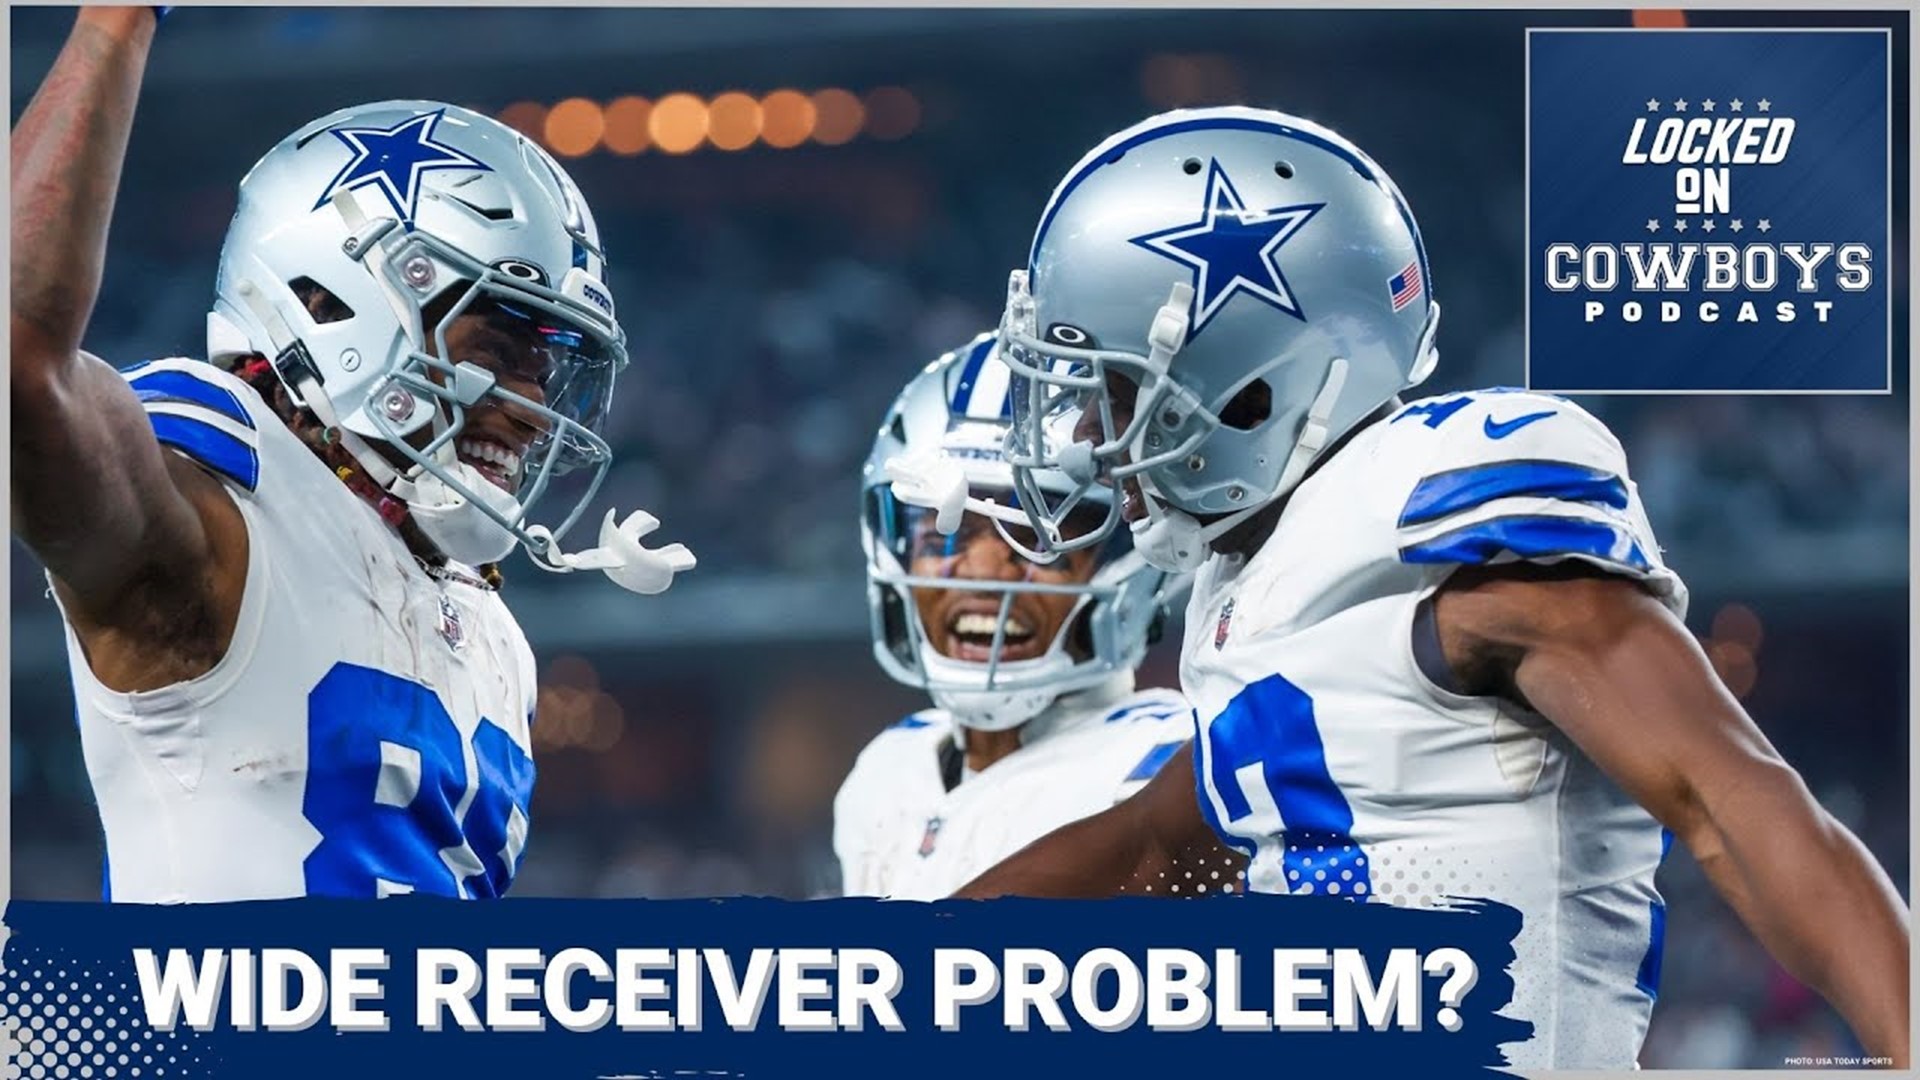 Marcus Mosher and Landon McCool recap the Cowboys' 2022 wide receivers: CeeDee Lamb's rise to stardom, where Michael Gallup went wrong and what's next in 2023.